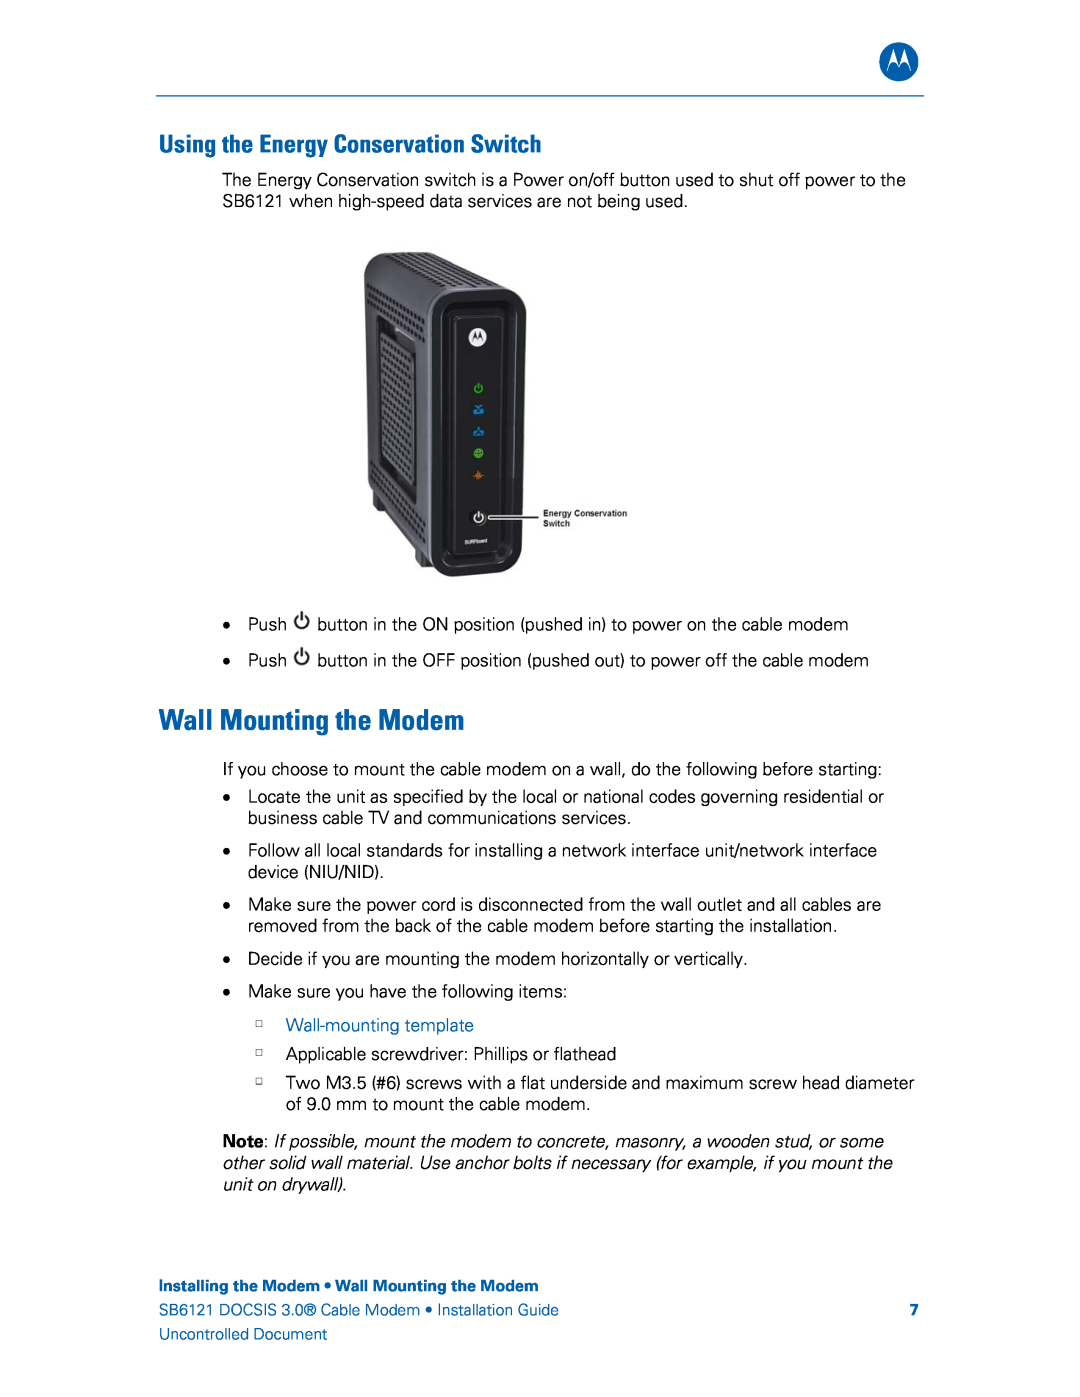 Motorola 575319-019-00, SB6121 manual Wall Mounting the Modem, Using the Energy Conservation Switch, Wall-mounting template 